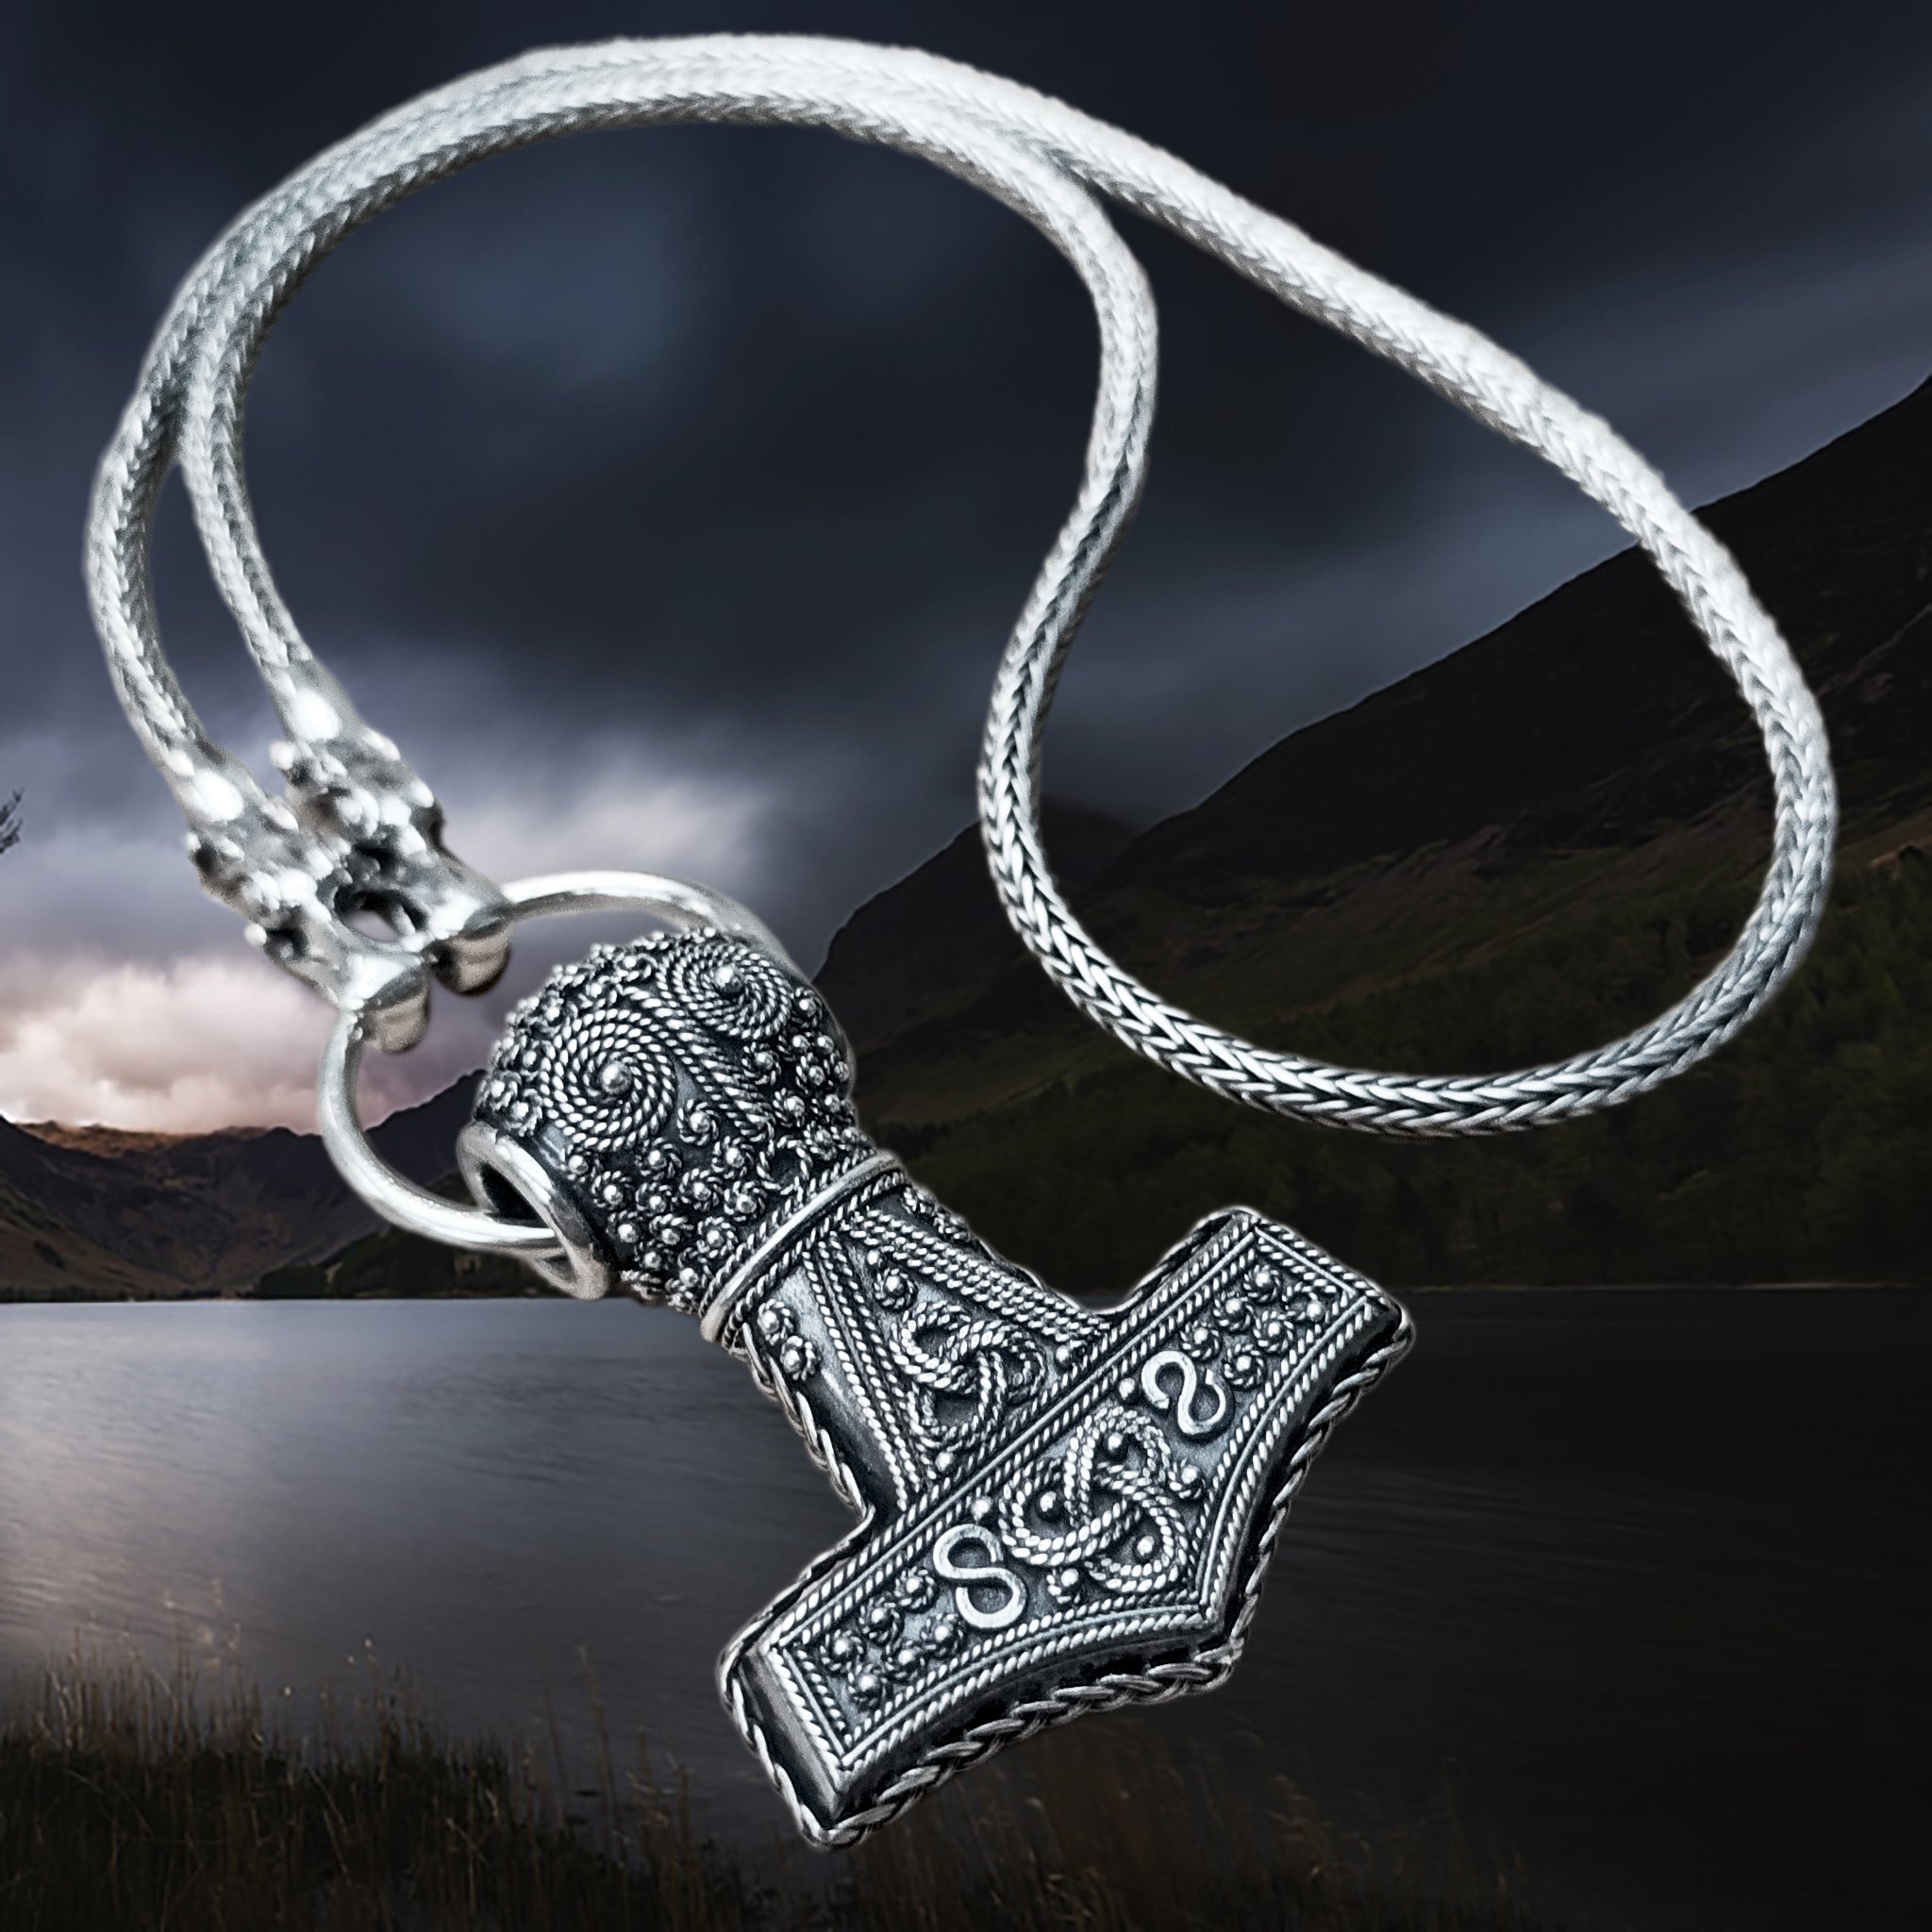 Silver Filigree Thors Hammer Pendant Replica from Öland with Split Ring and Silver Snake Chain with Tromso Dragon Heads